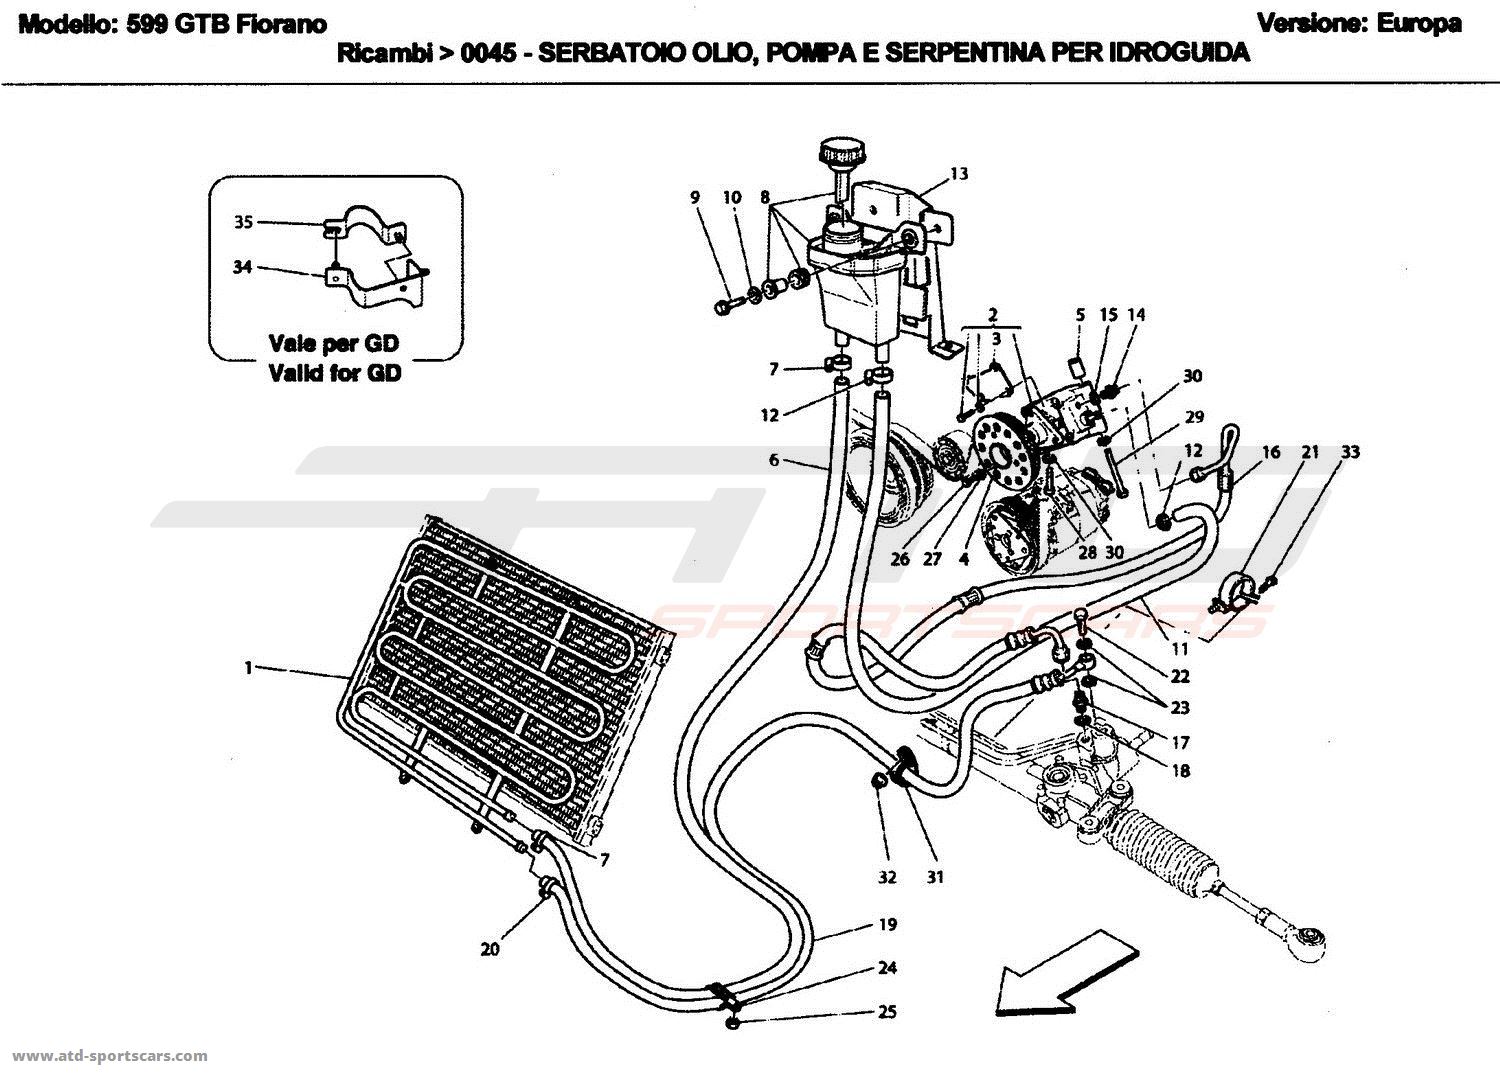 OIL TANK, PUMP AND SERPENTINE FOR SERVOSTEERING